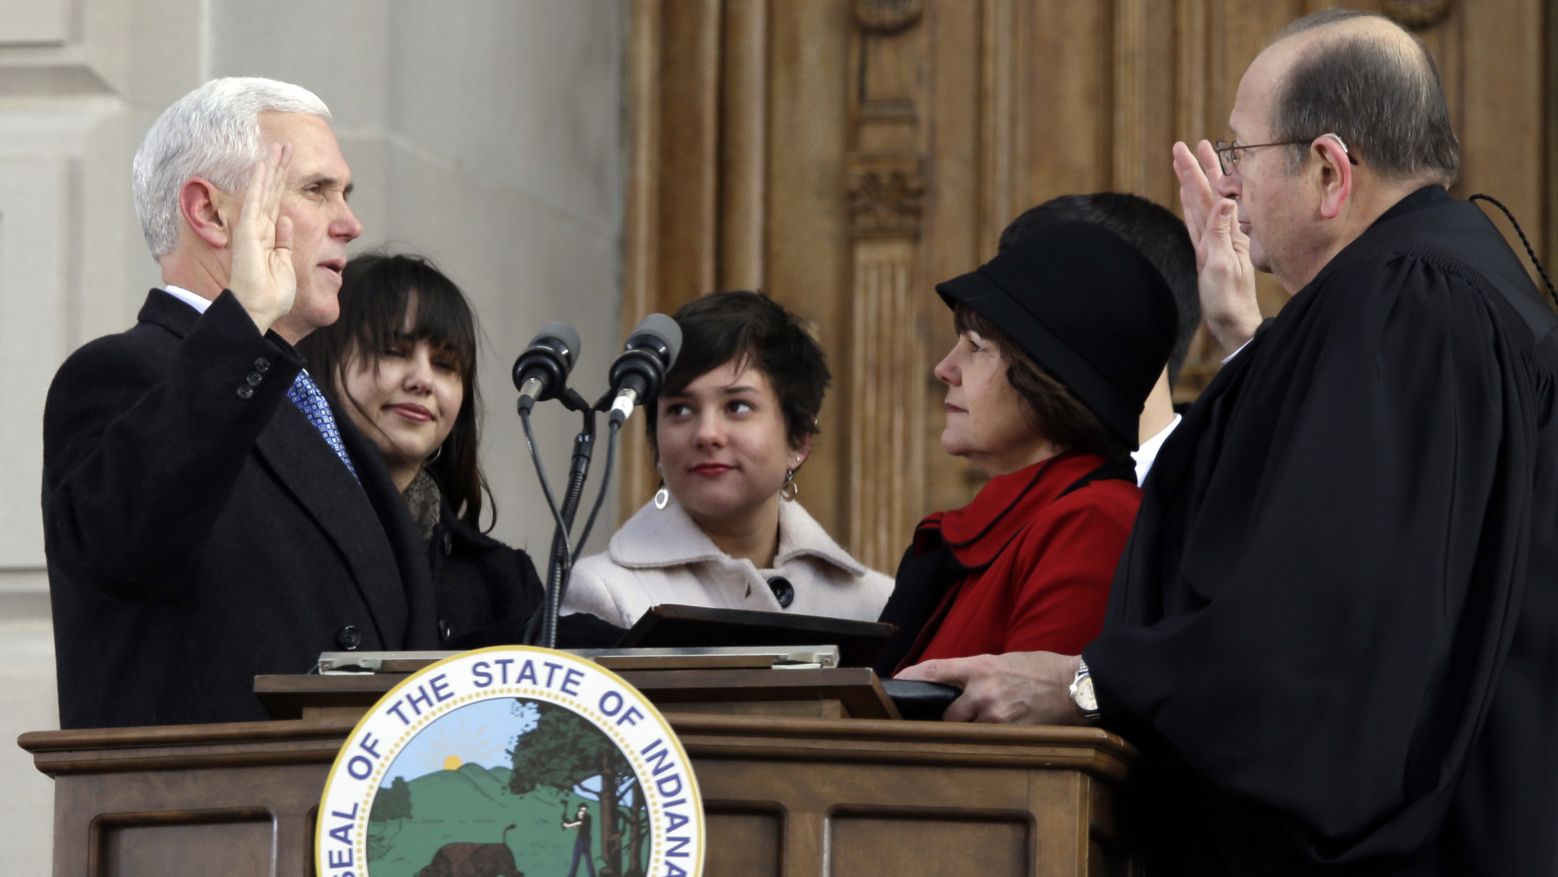 Pence is sworn in as Indiana's 50th governor in 2013.